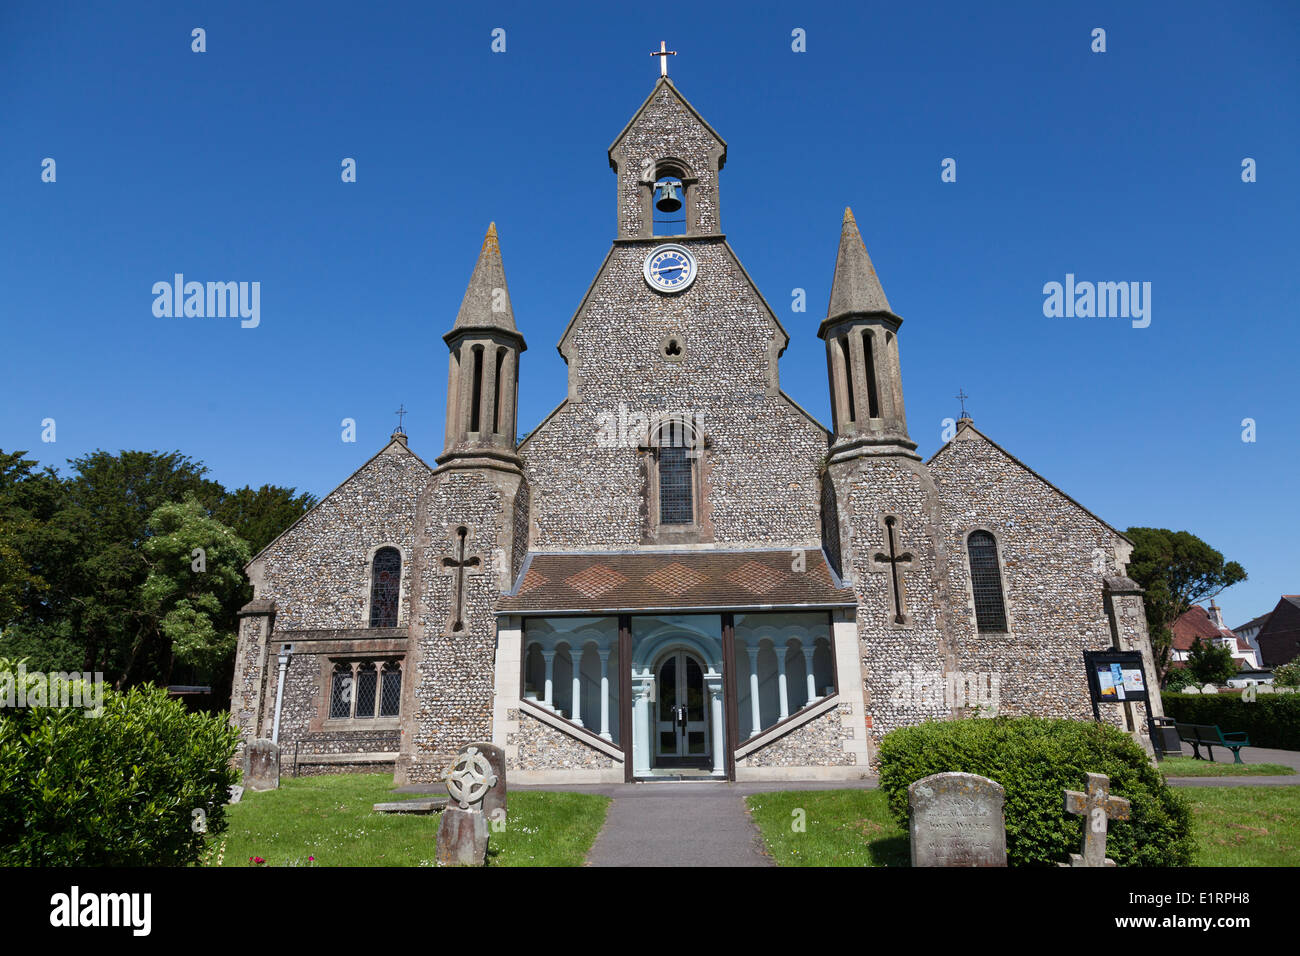 Flint stone built St James Church Emsworth with bell gable and covered porch. Stock Photo